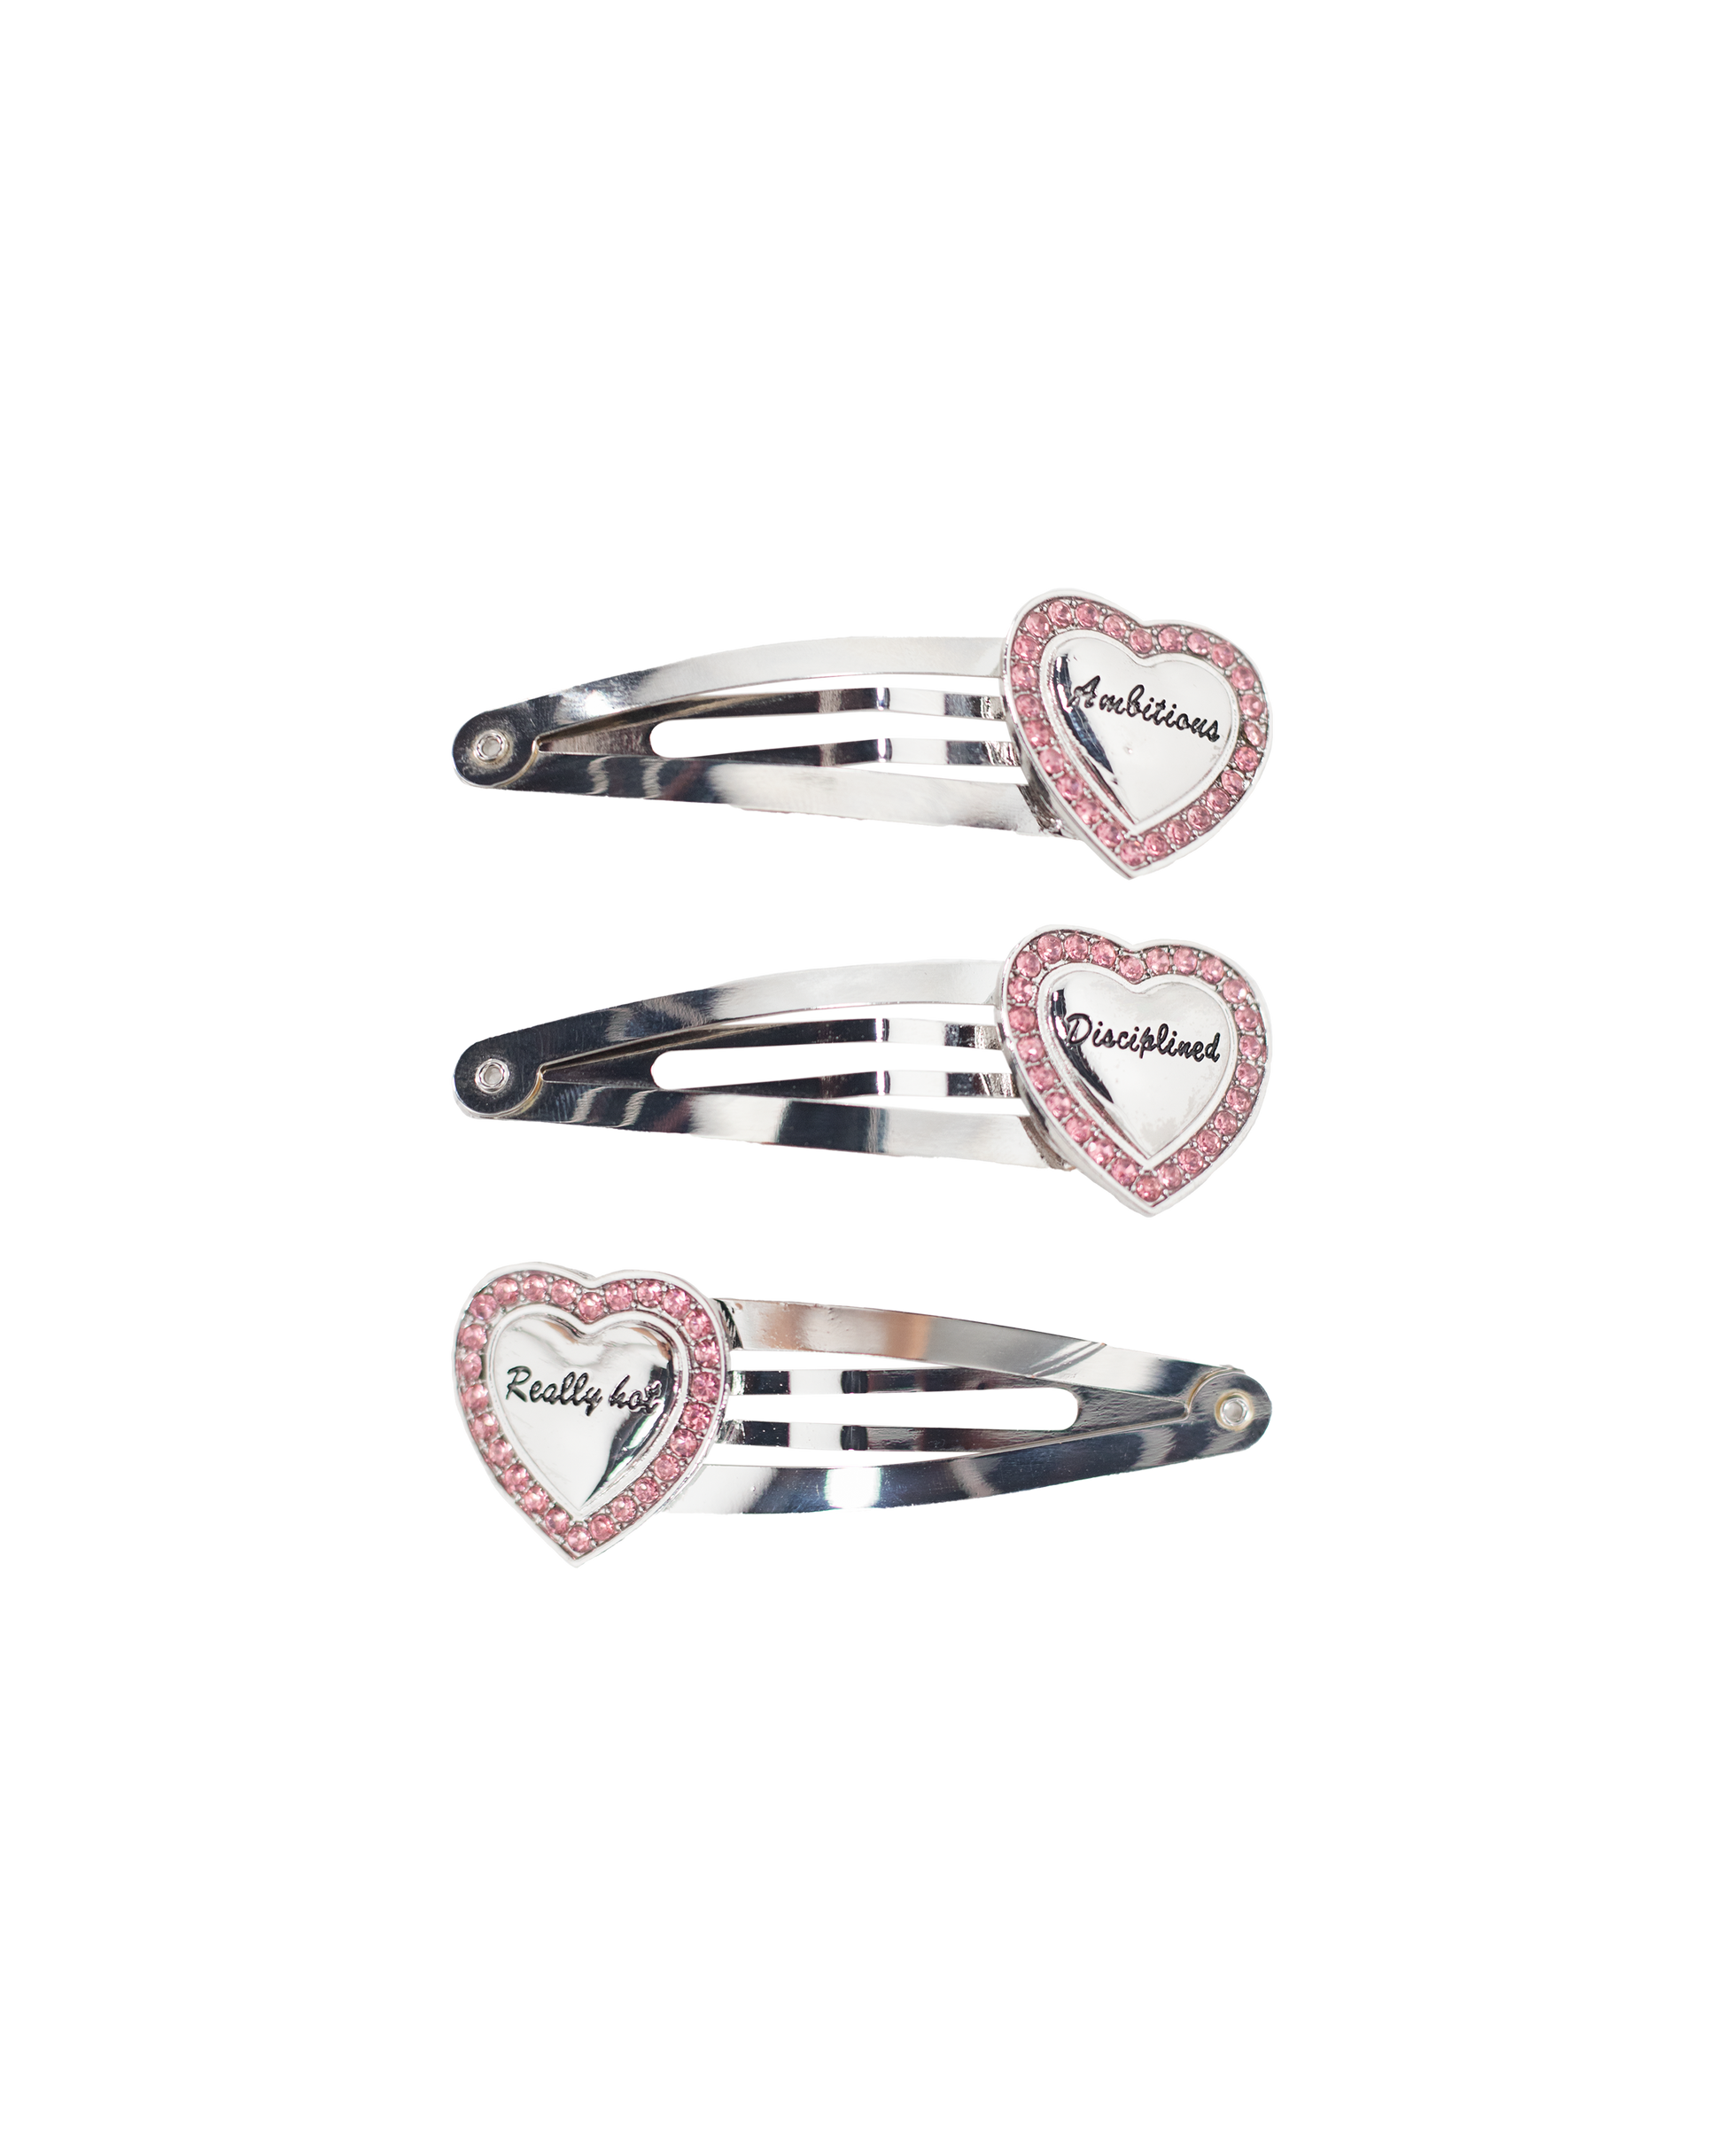 silver heart hair clip with pink gems | Ambitious, Disciplined, Really Hot Clips | Baobei Label